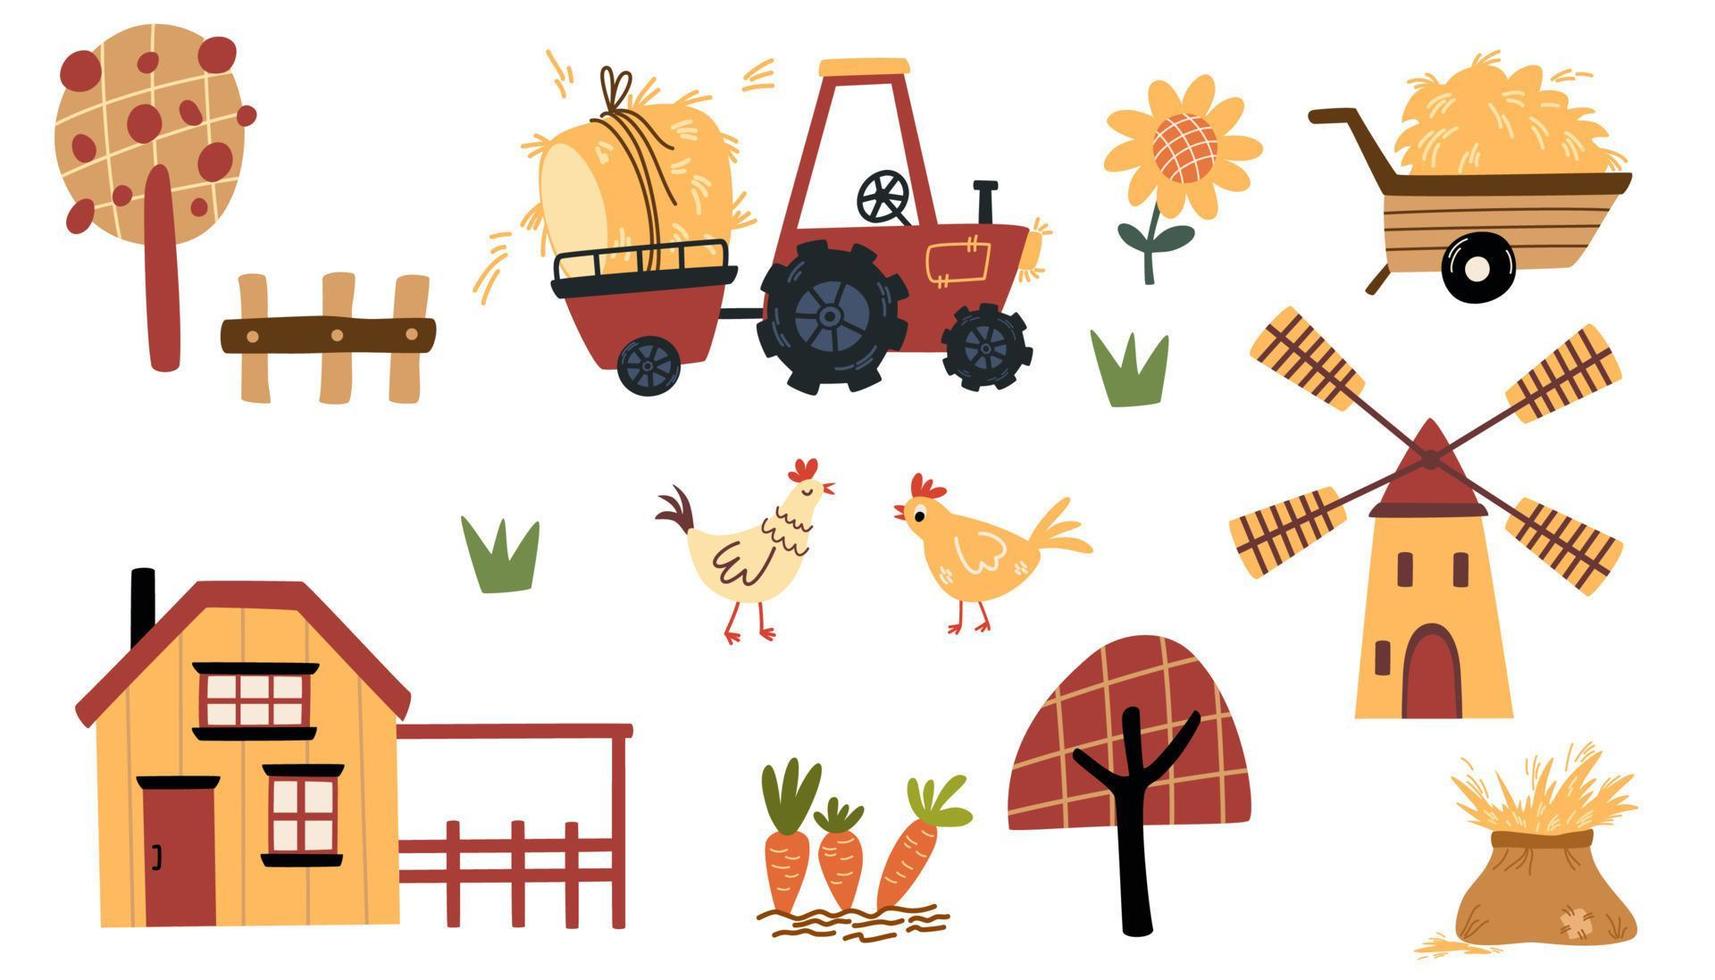 Farm set. Rural houses, windmill, tractor with hay, chickens, trees and crops. Agriculture collection, rural elements. Vector cartoon illustration isolated on the white background.